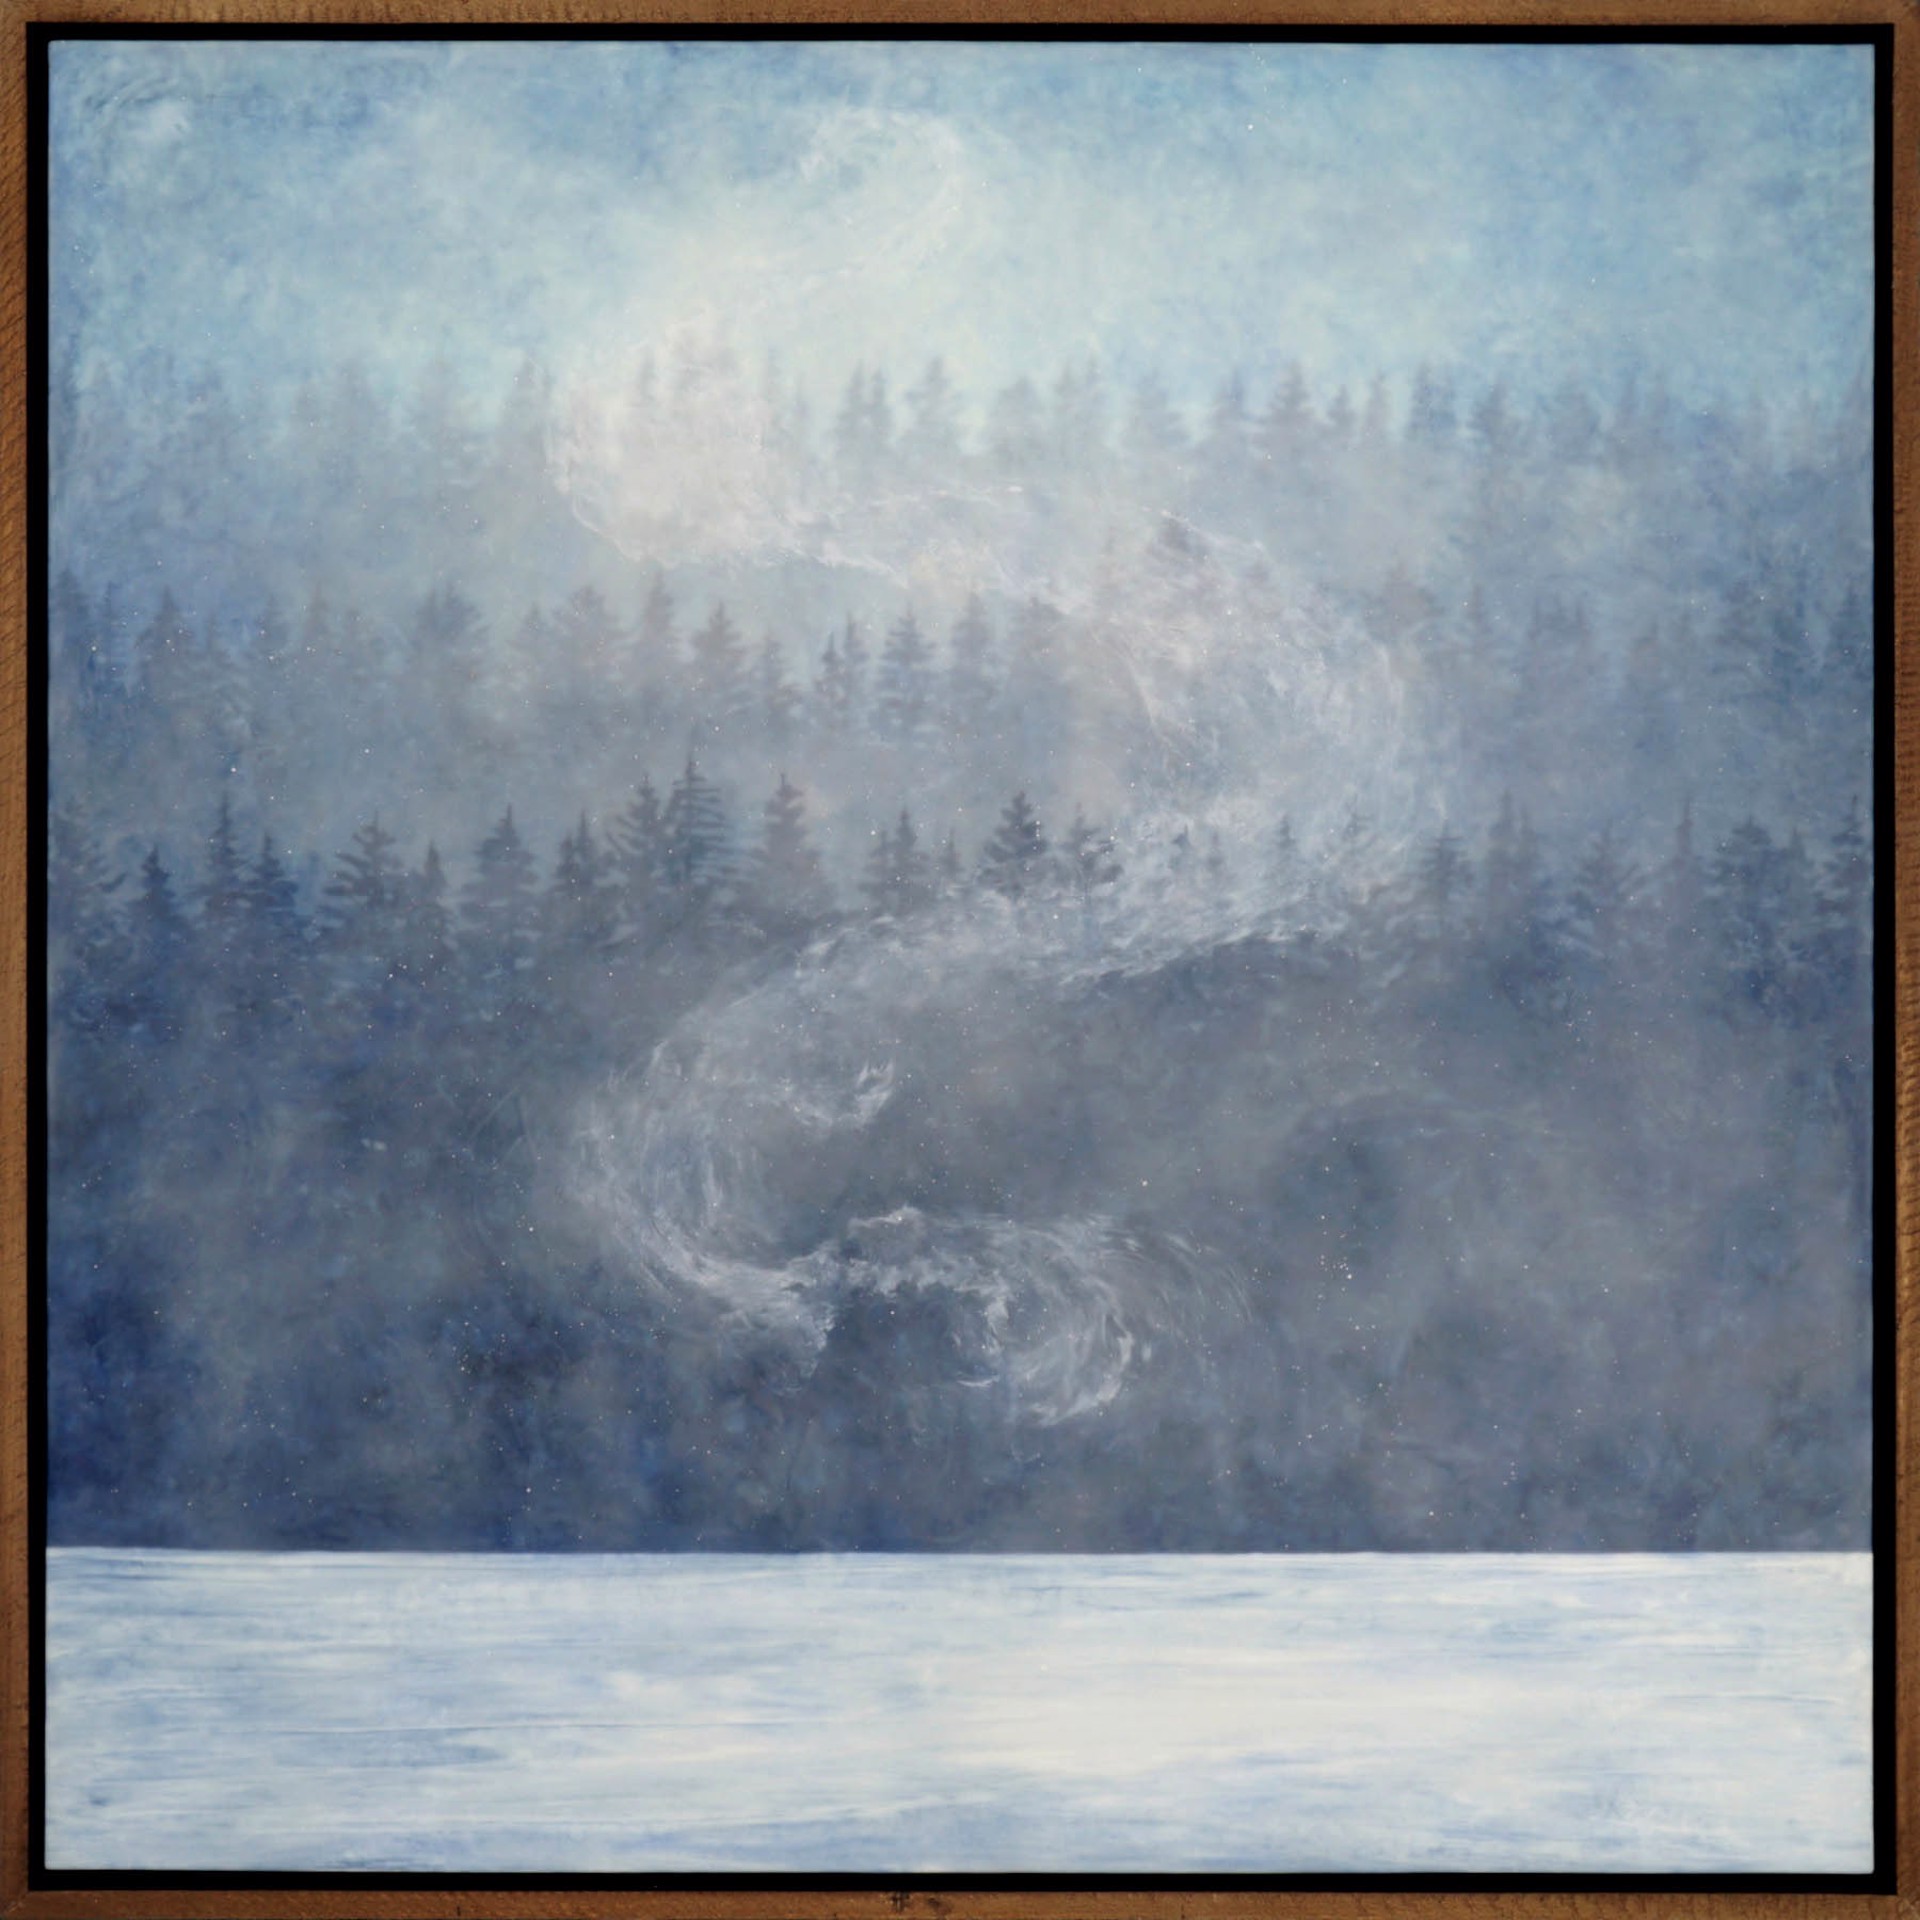 Original Encaustic Landscape Painting Featuring A Snow Covered Mountain With Wind And Hazy Clouds